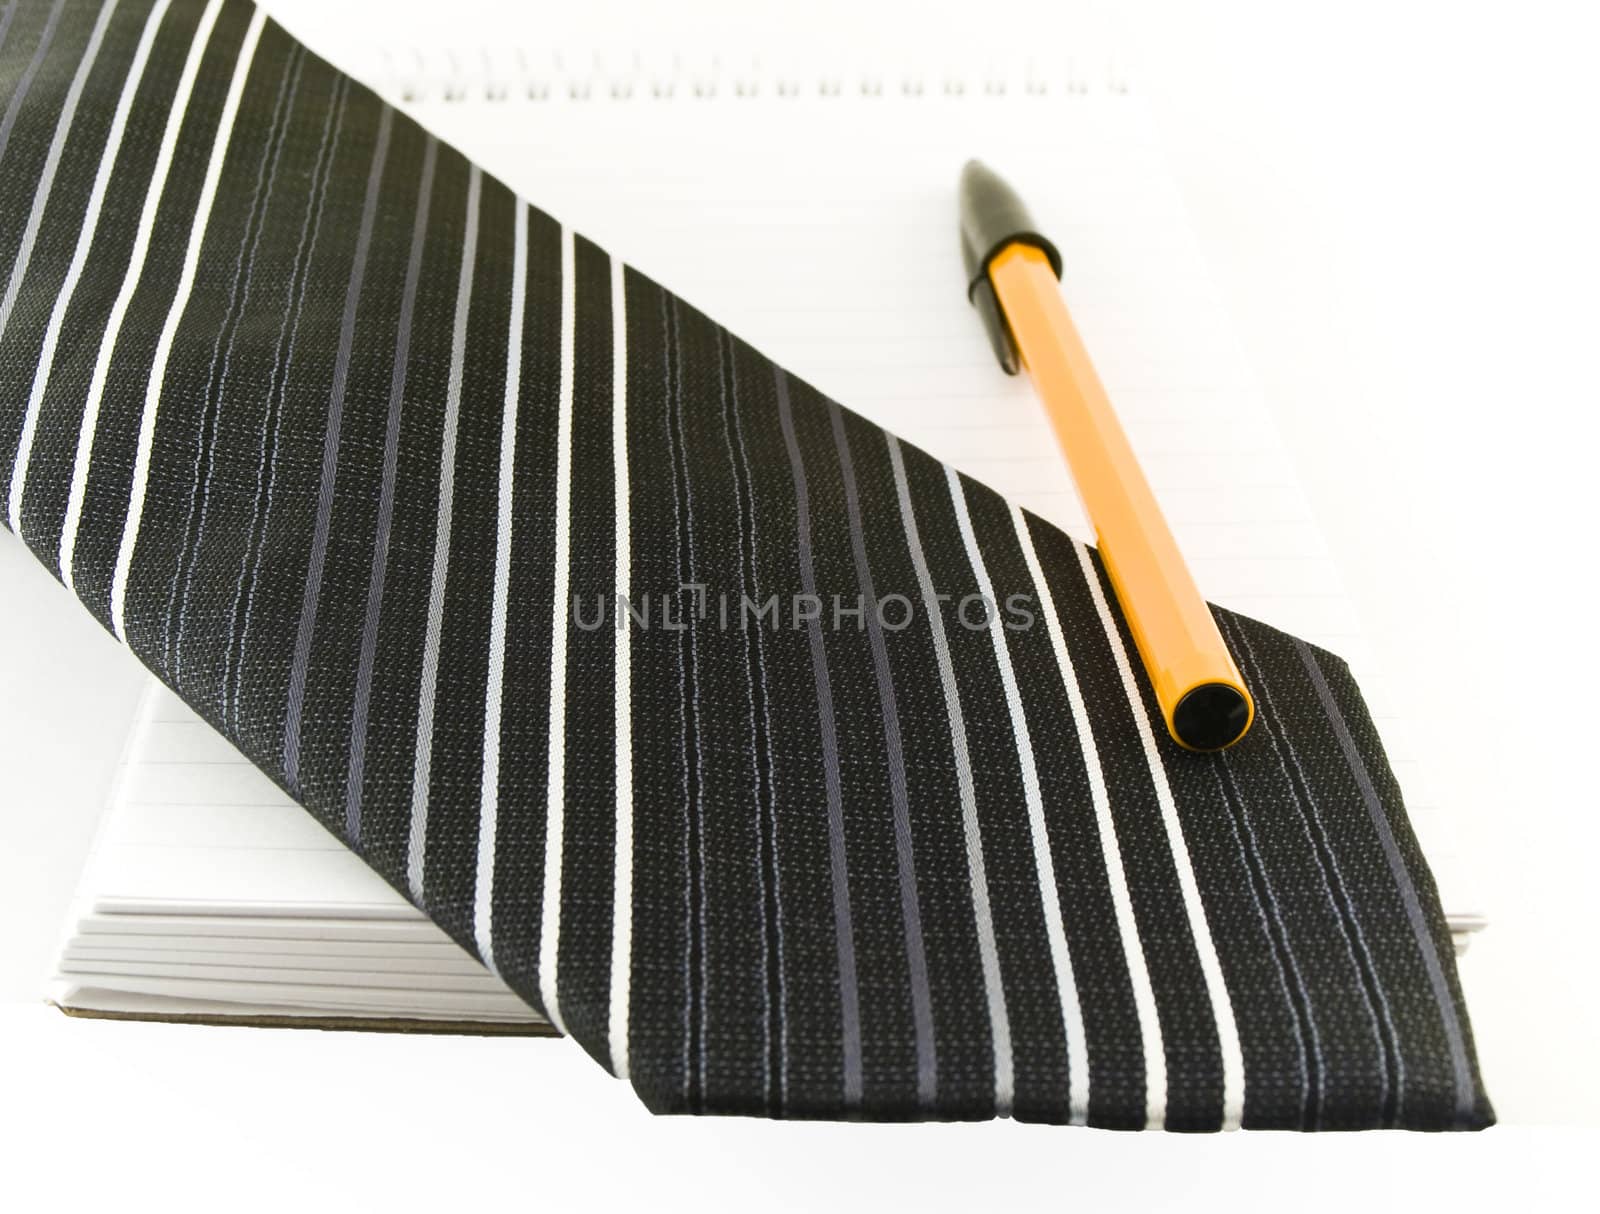 Ballpoint Pen and Tie on Notepad on White Background by bobbigmac